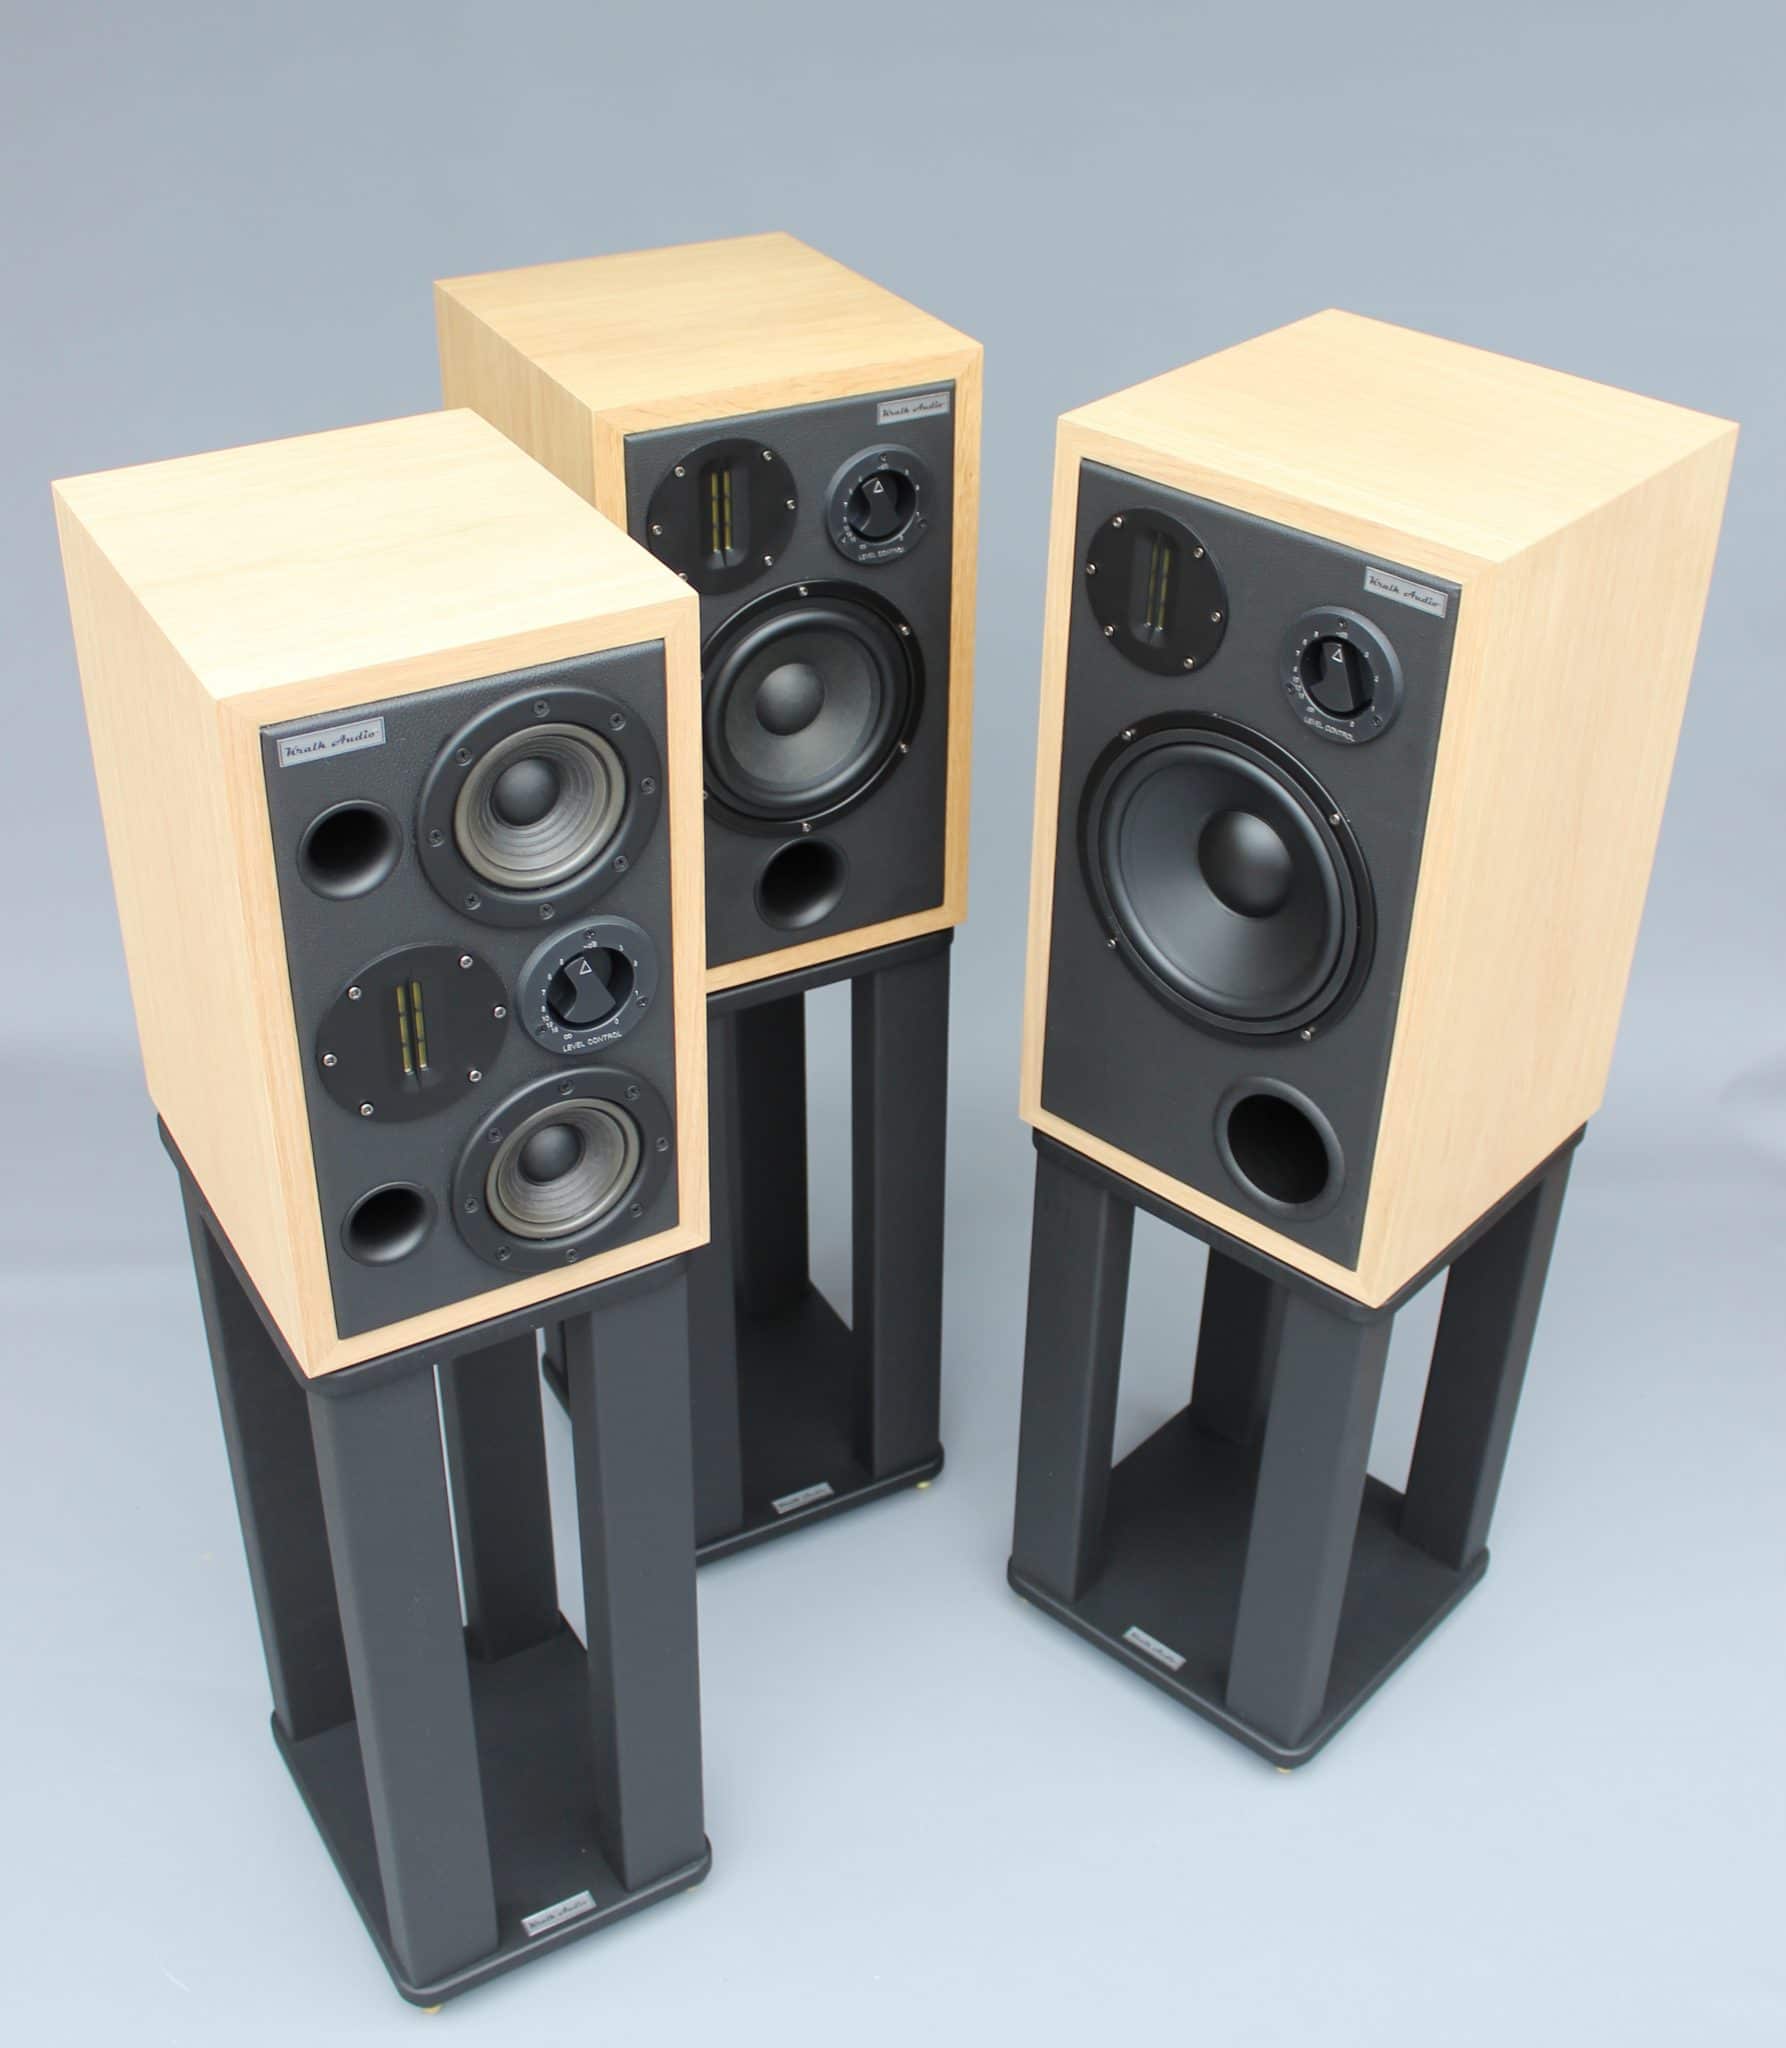 TDB Speakers Launched By Kralk